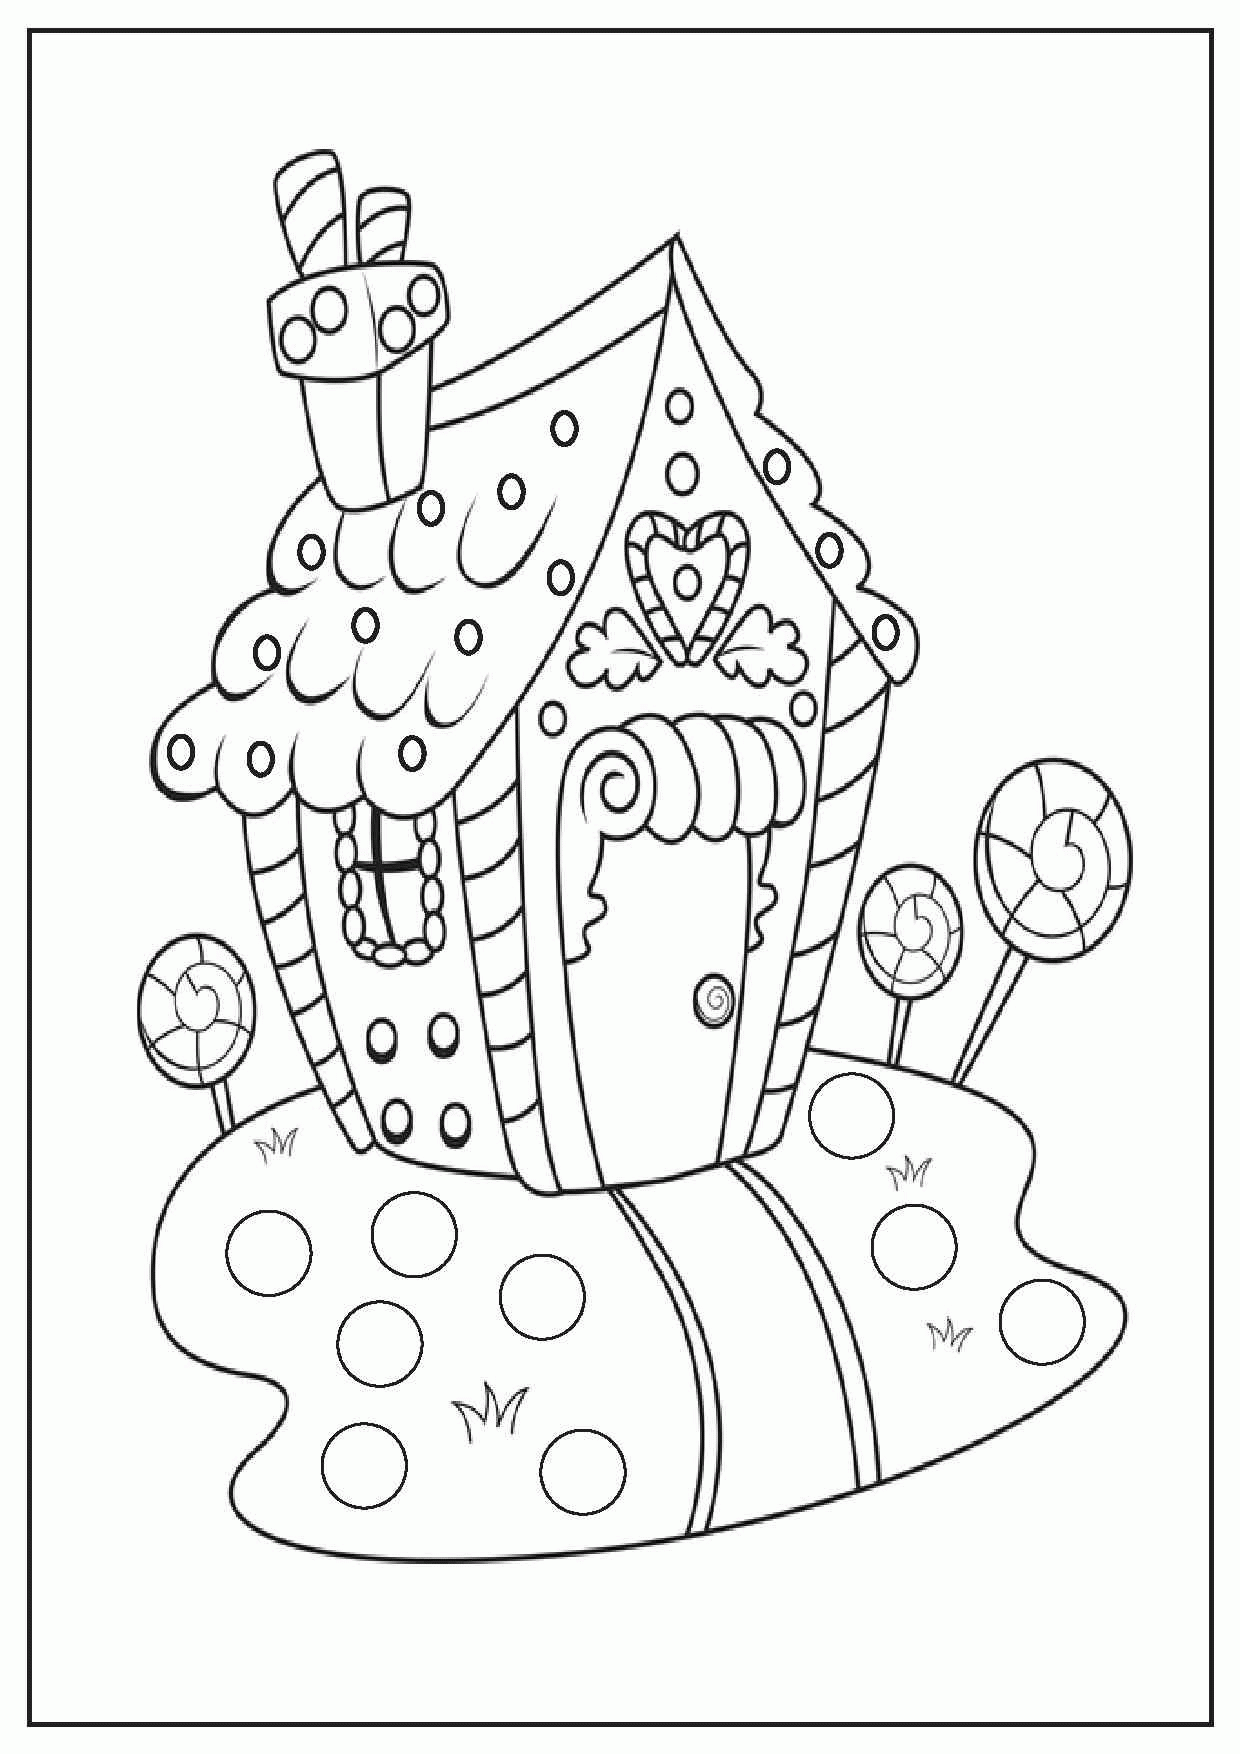 Www.freeprintable Christmas Coloring Pages - Coloring Home Christmas Presents Coloring Sheets